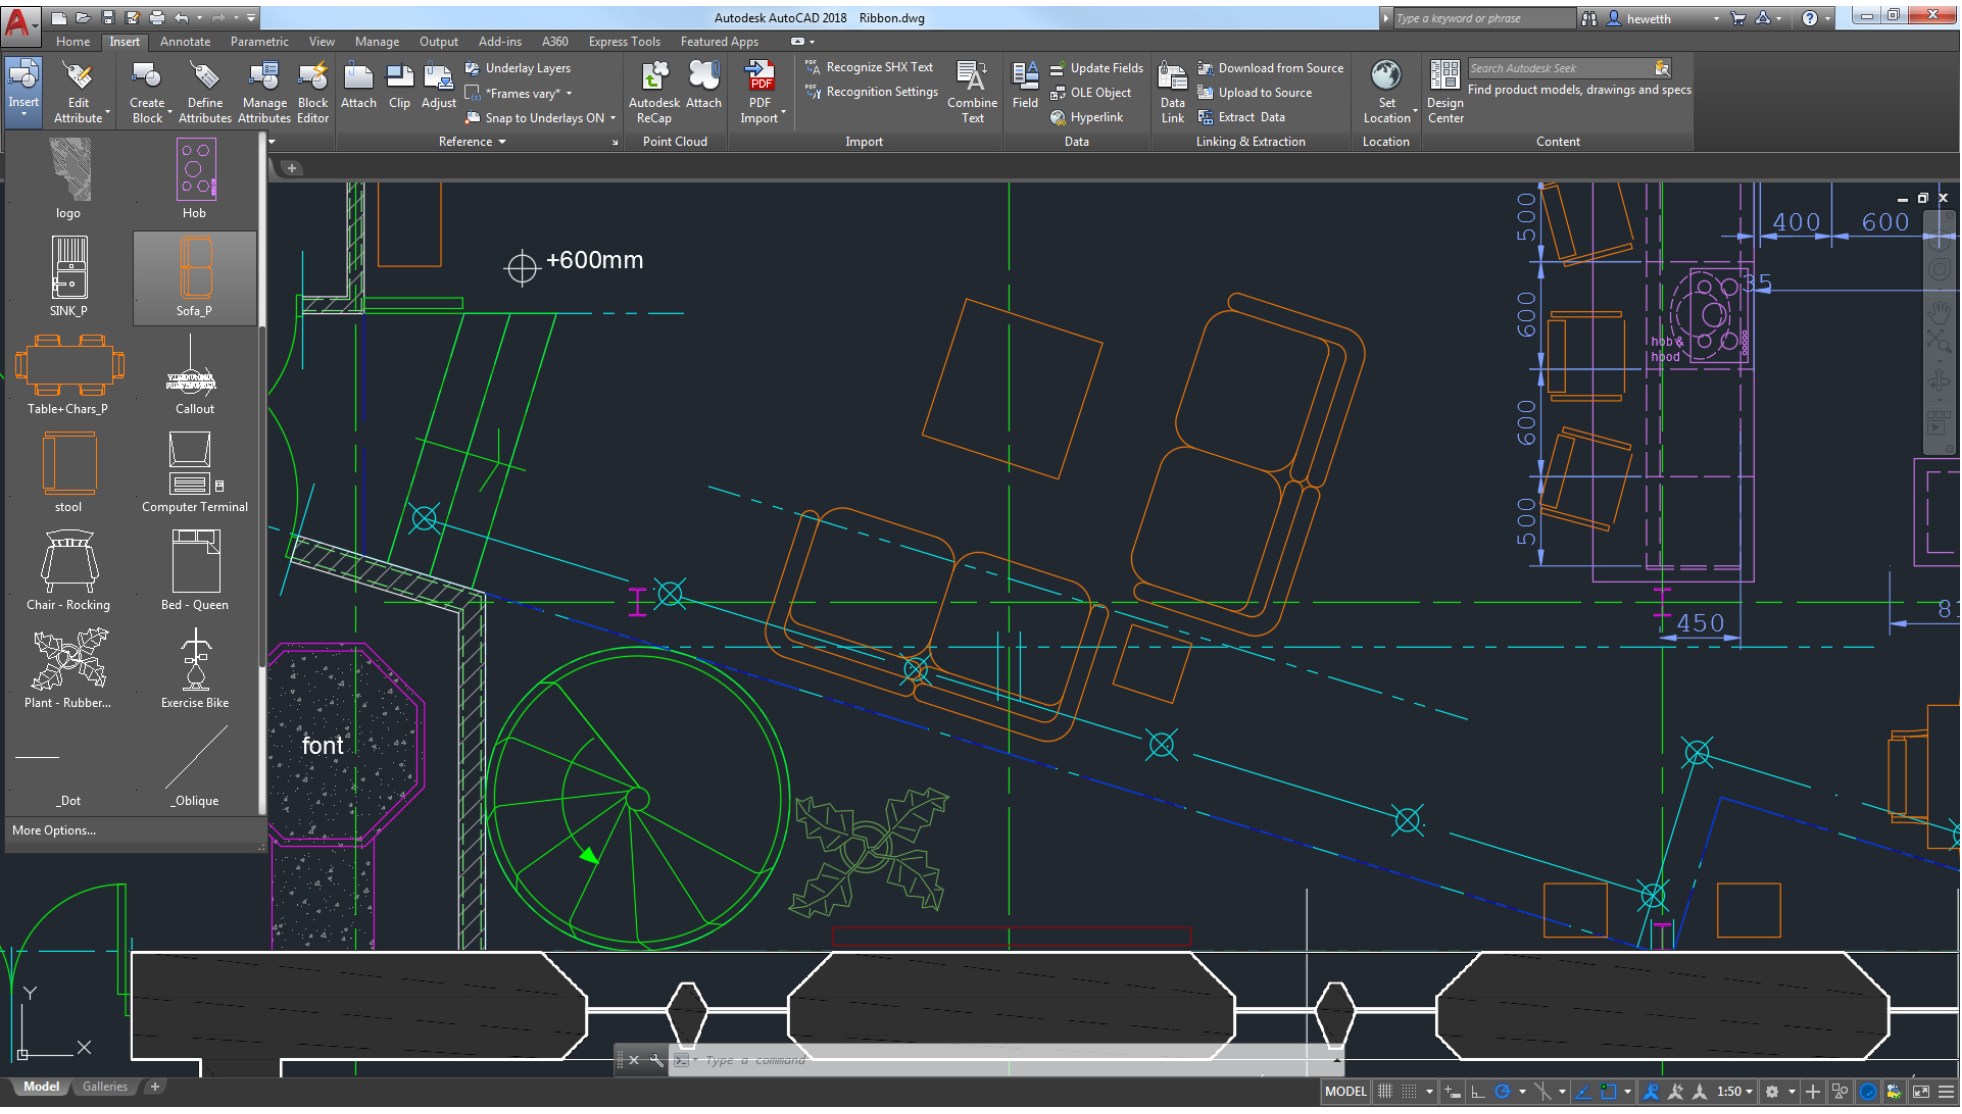 AutoCAD Software - Access favorite tools easily with the AutoCAD ribbon